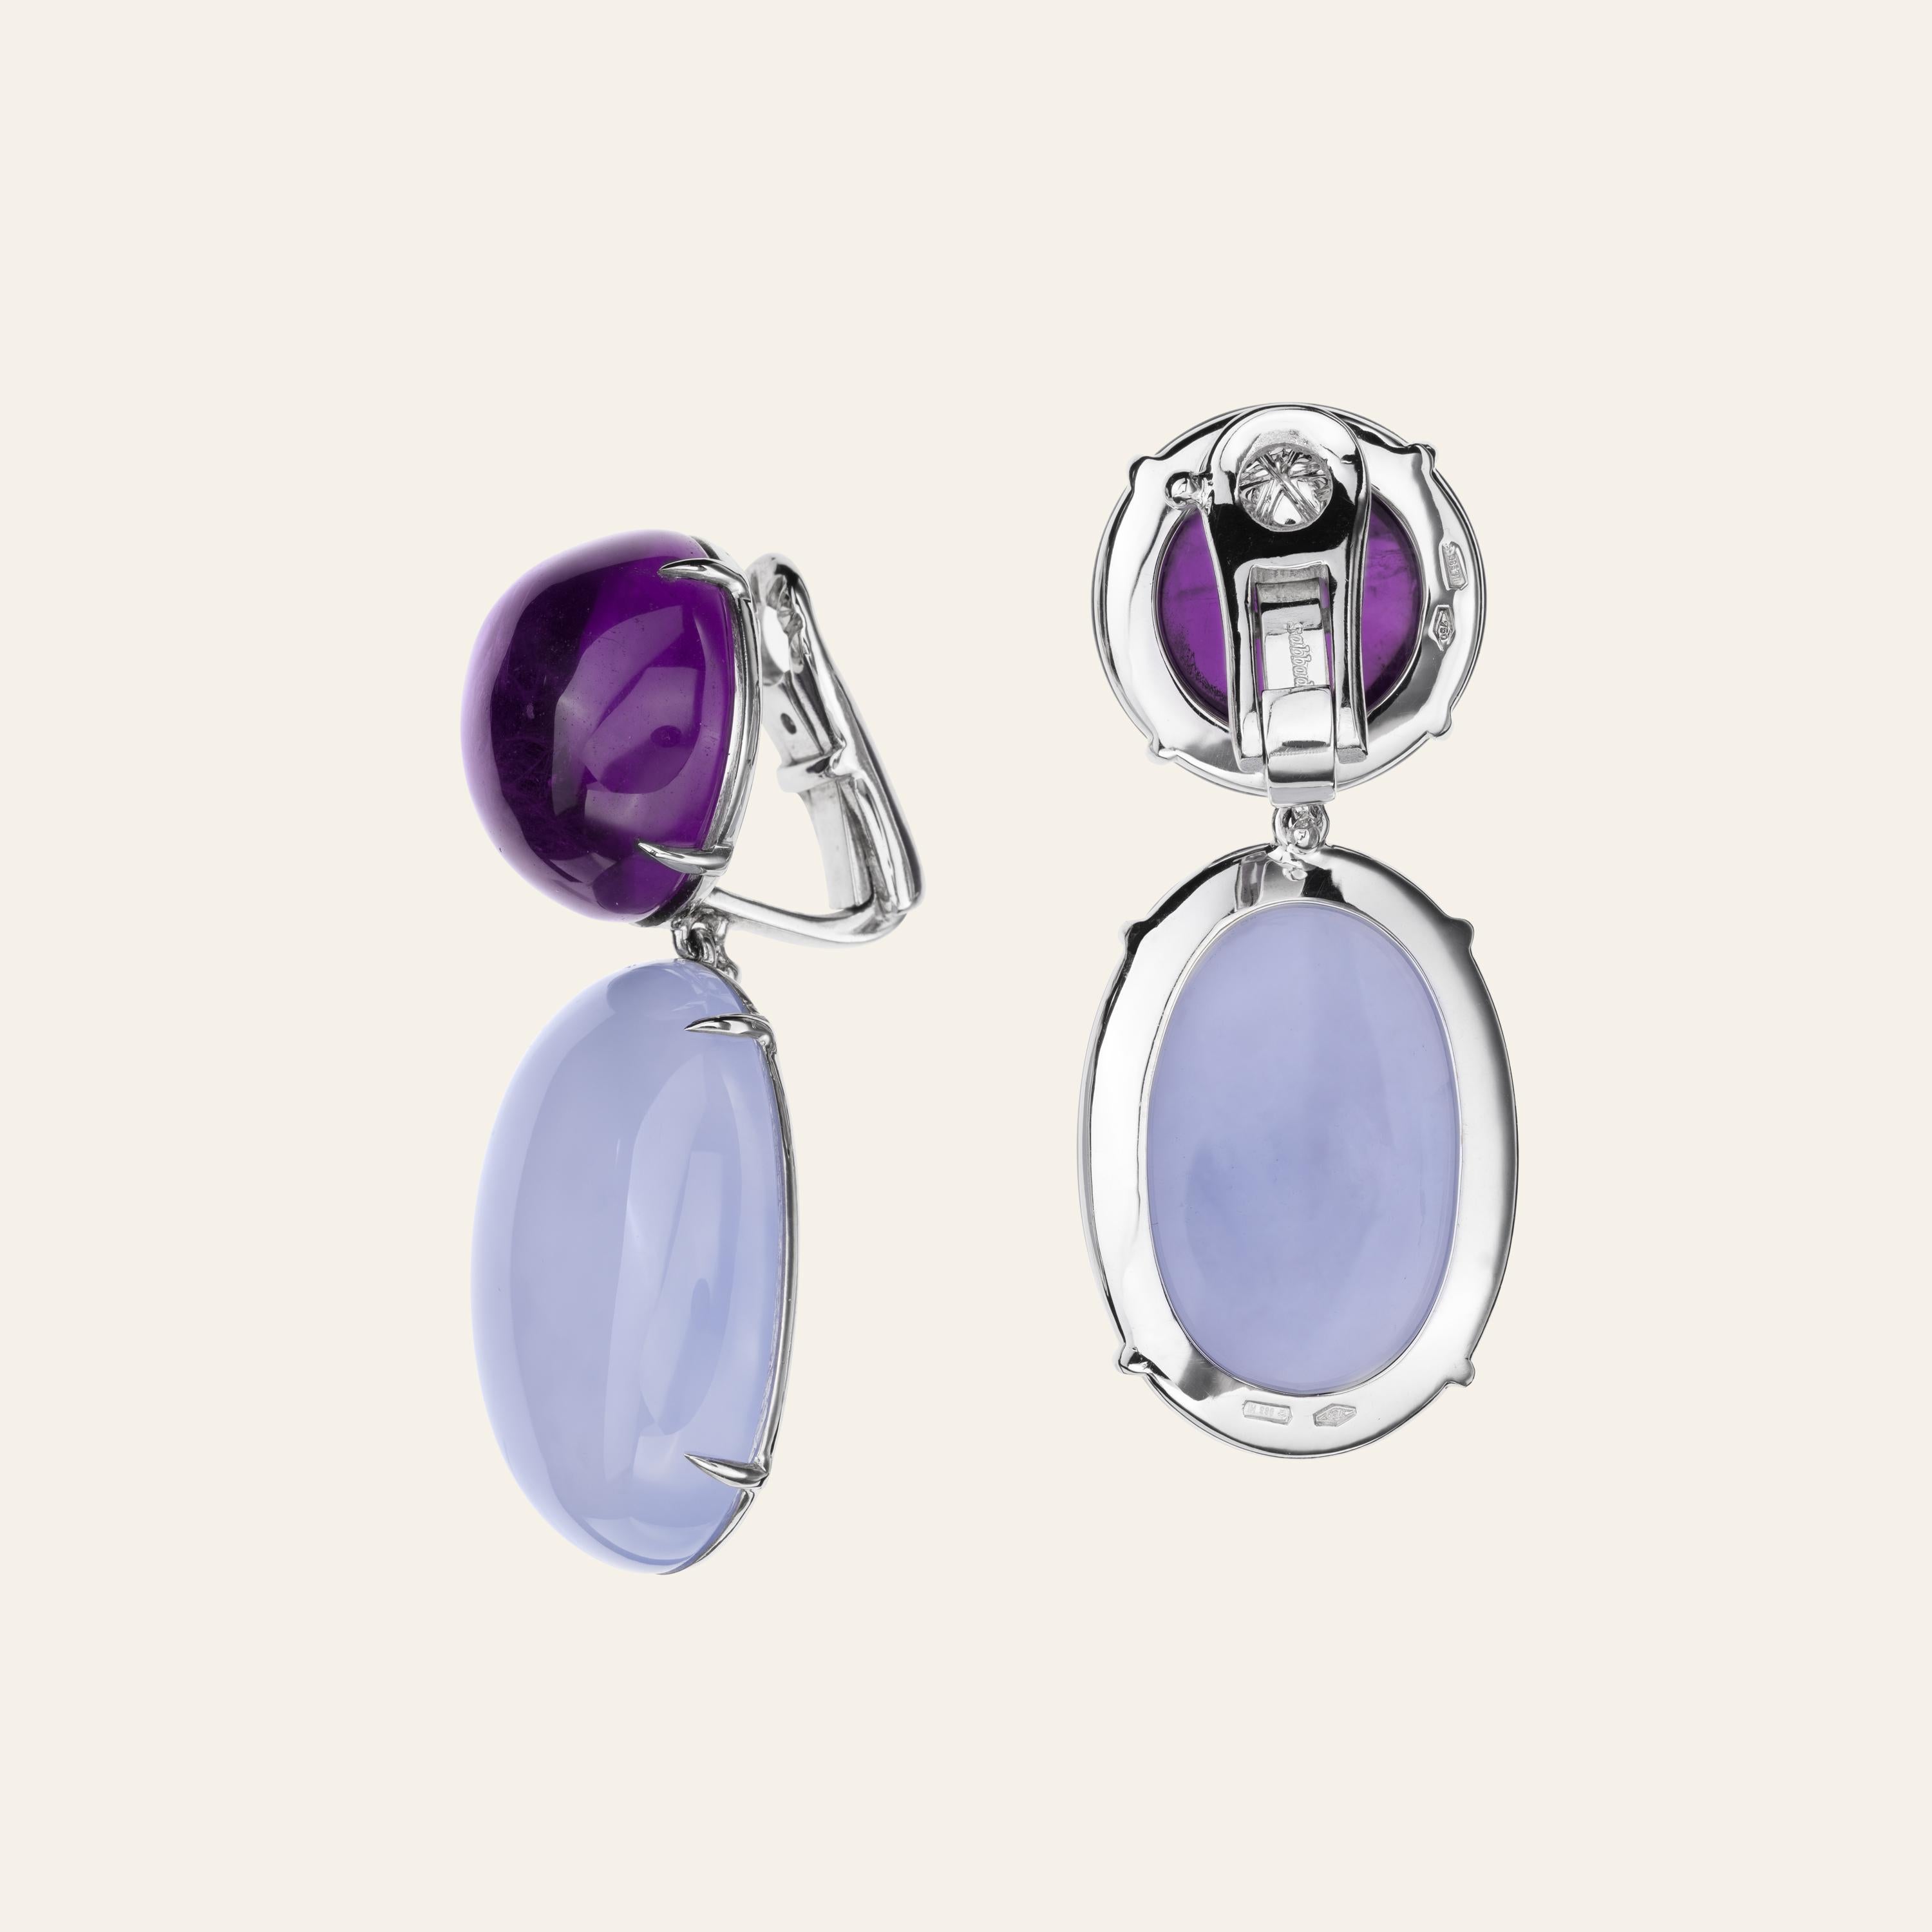 Sabbadini Cocktail Earrings With Amethyst And Chalcedony 
18k White gold earrings, round cabochon amethysts 30,34ct and oval cabochon chalcedony 50,51ct. Gold 15gr
Hand made jewelry & designed in Milan, in Via Montenapoleone.
This item comes